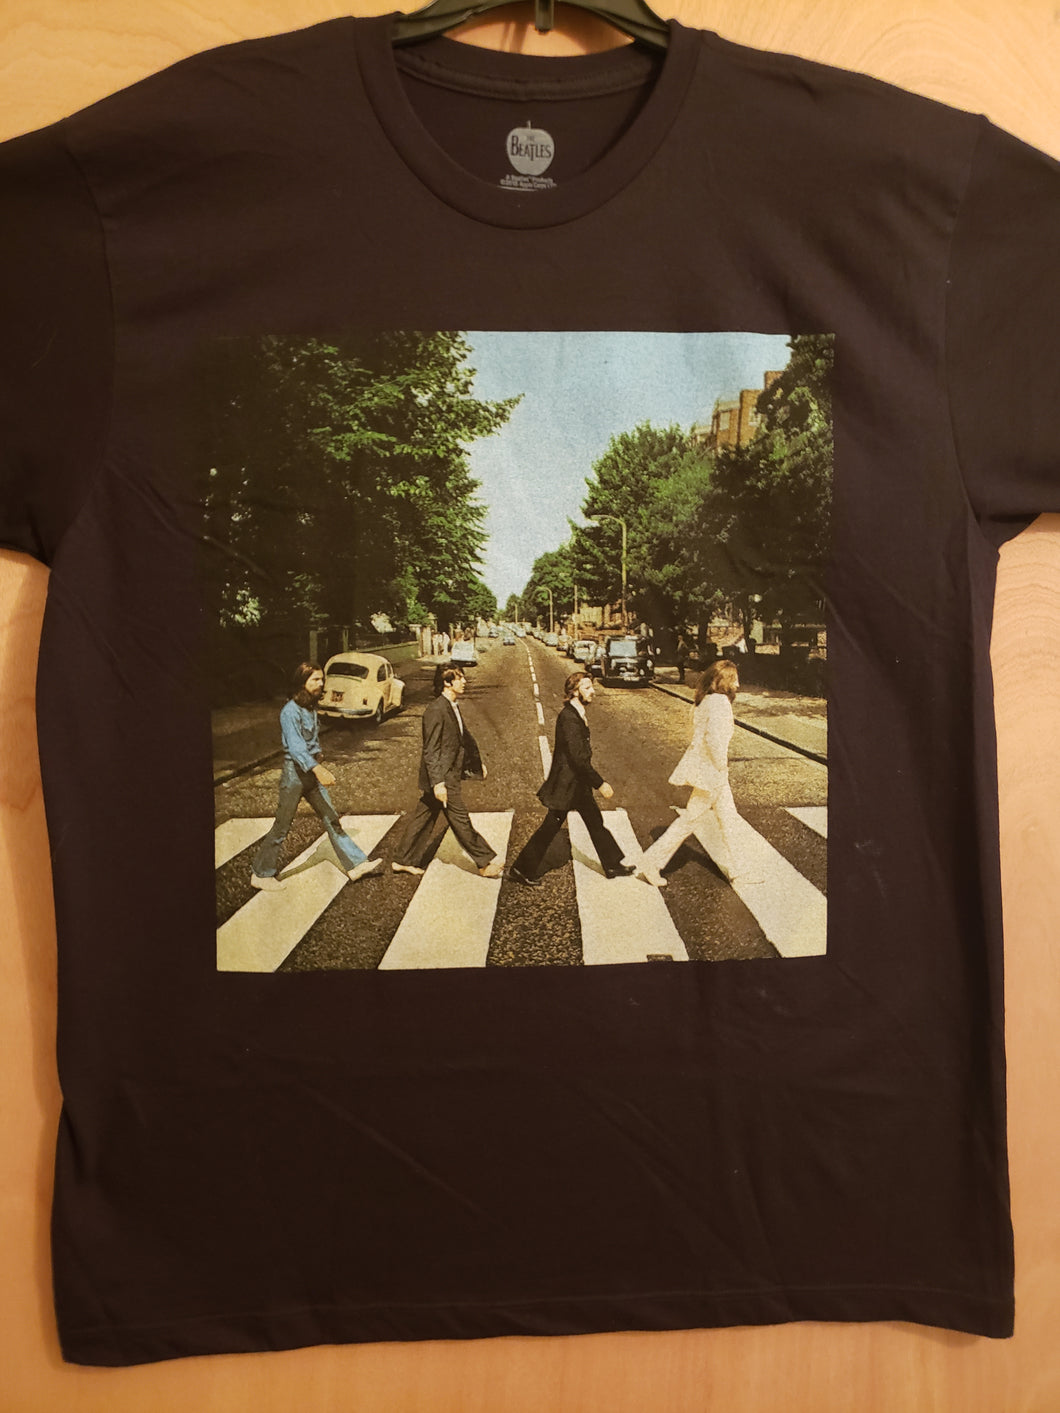 THE BEATLES T-SHIRT BRAND NEW  LARGE 1 -SIDED TEE